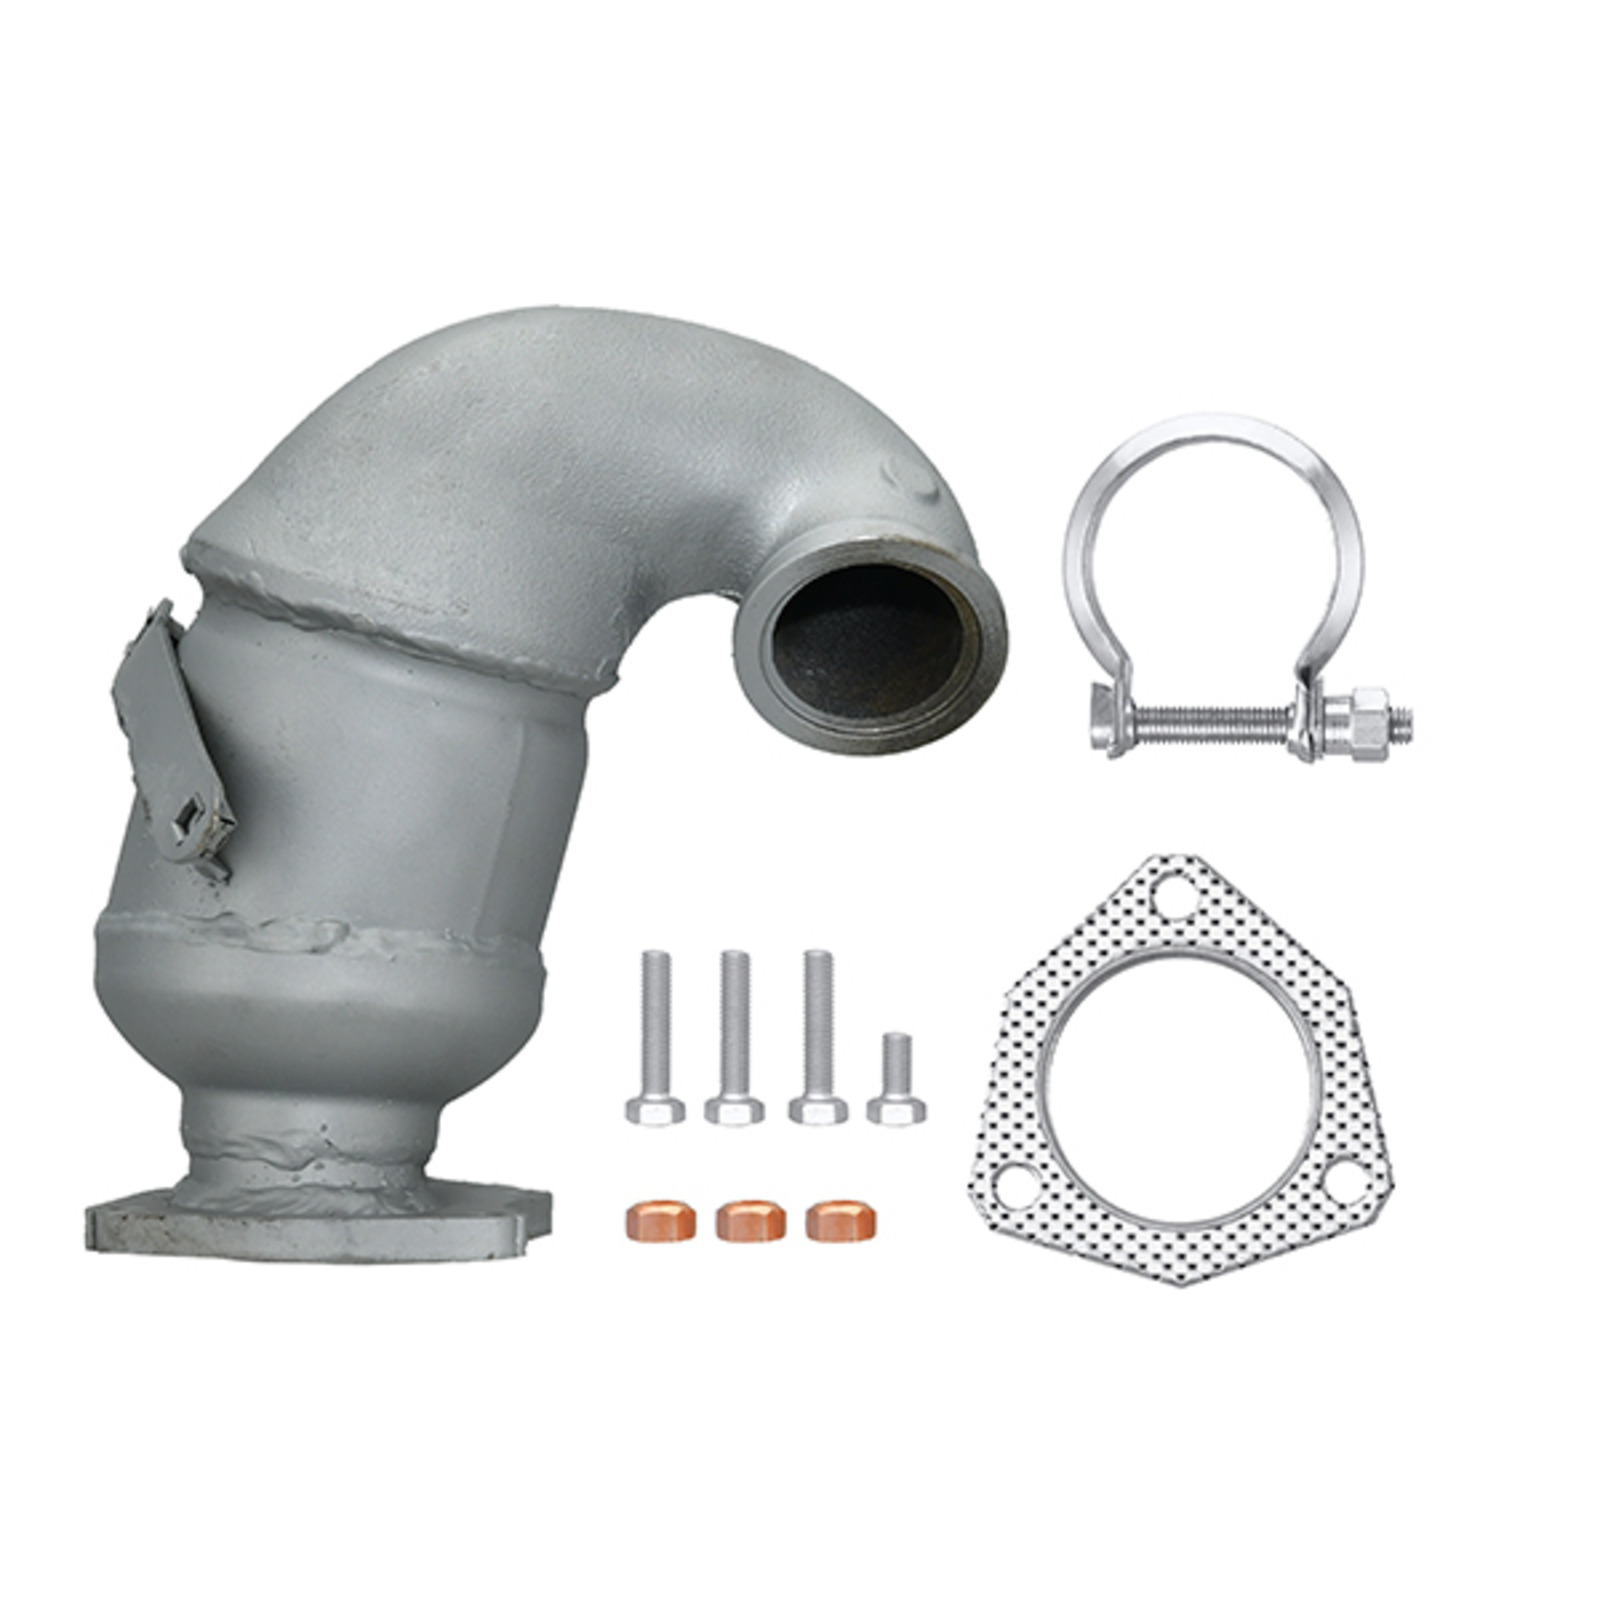 HELLA Pre-Catalytic Converter Easy2Fit – PARTNERED with Faurecia